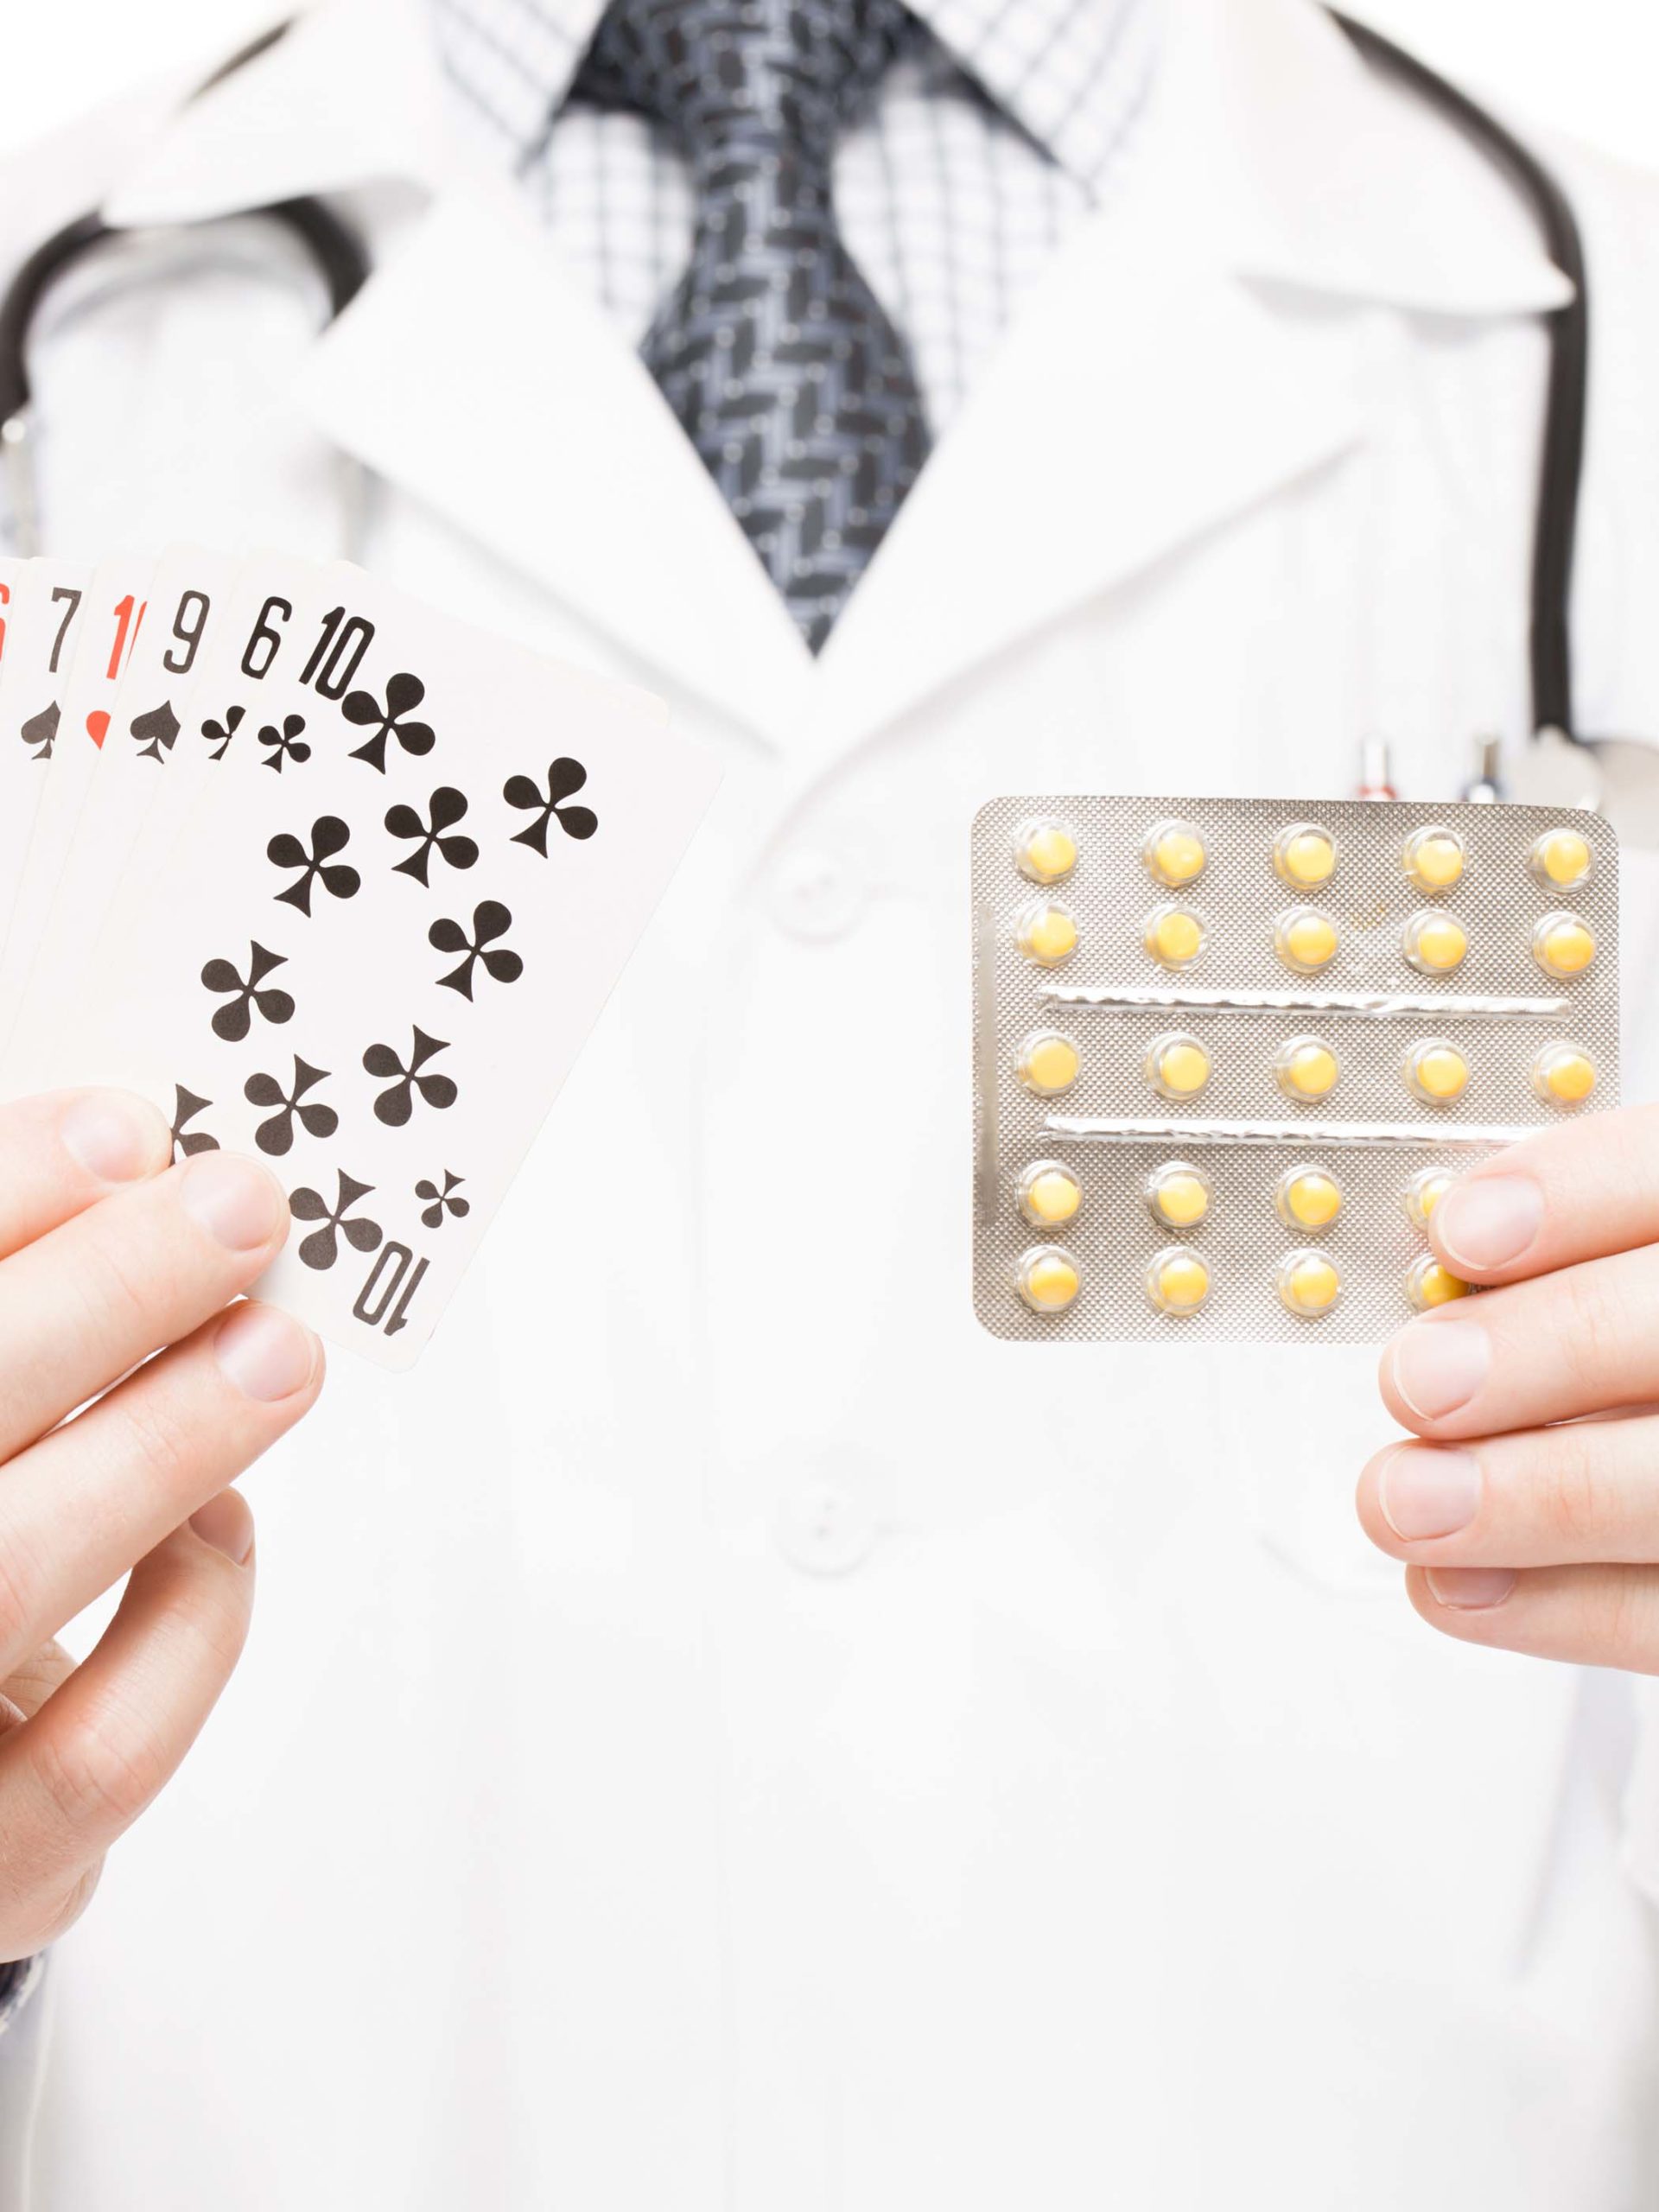 Dr. holding cards for magic trick in one hand and medication in the other